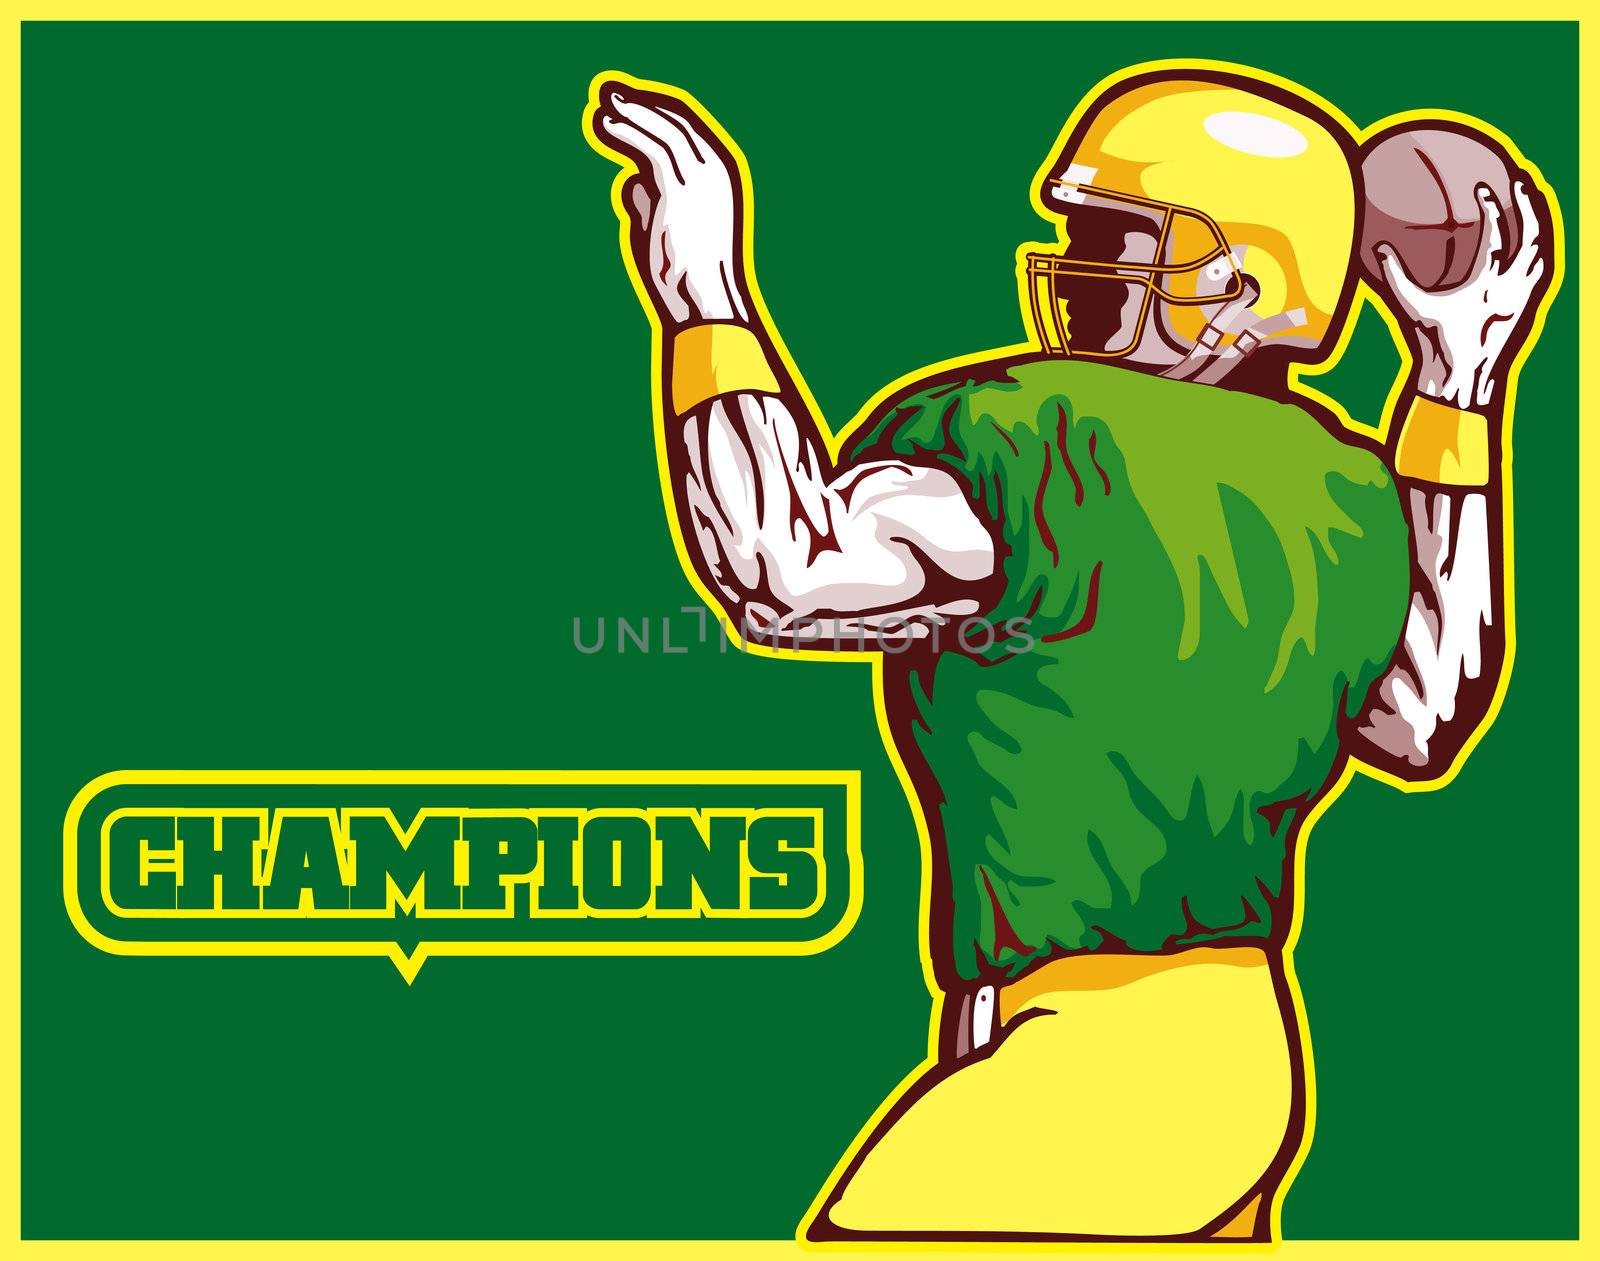 Illustration of an American football player quarterback about to throw winning pass with words "champions"